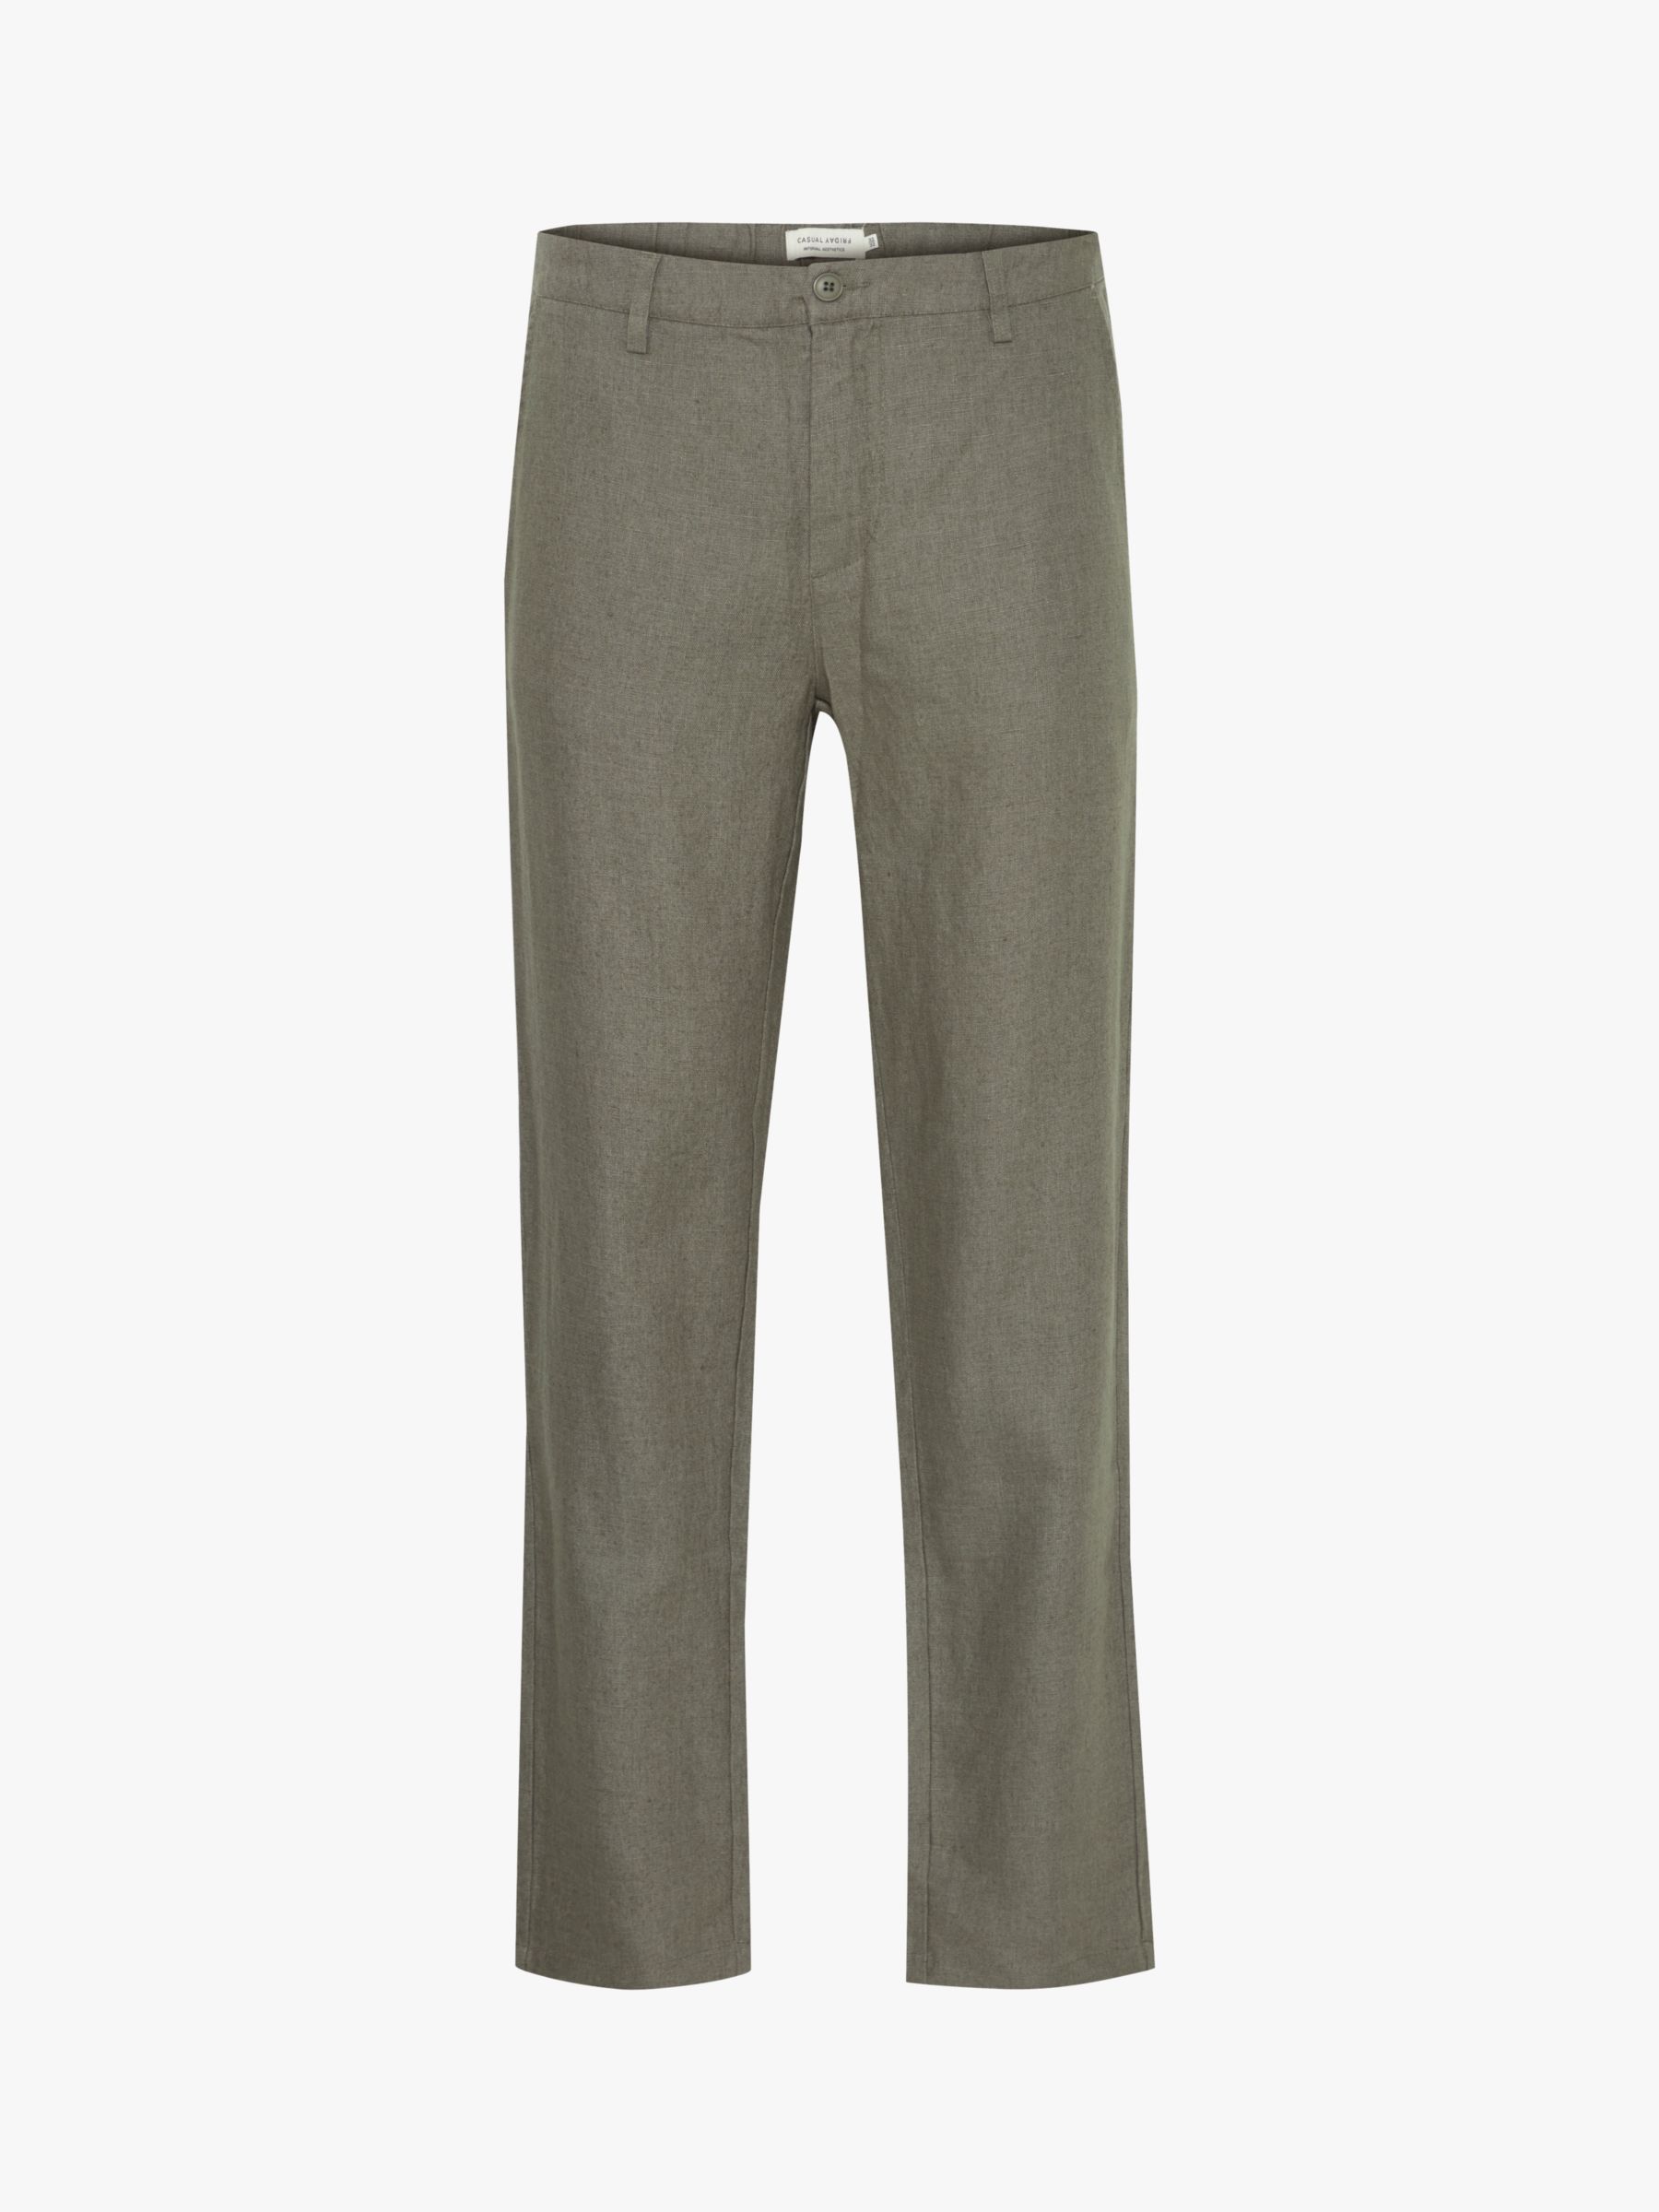 Casual Friday Pandrup Regular Fit Linen Trousers, Agave Green, 28R